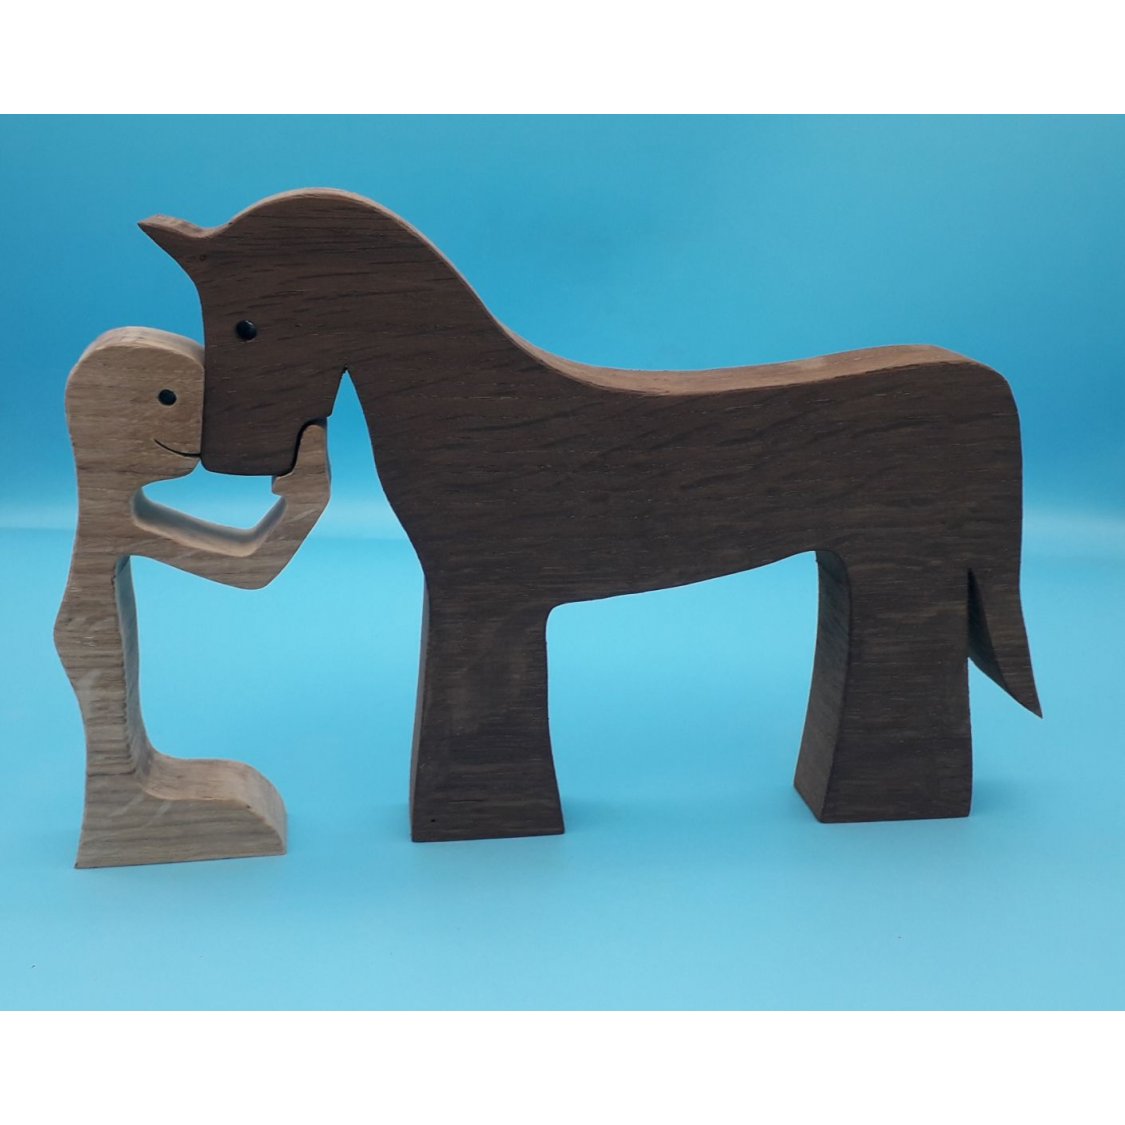 Figurine Man and his horse in wood